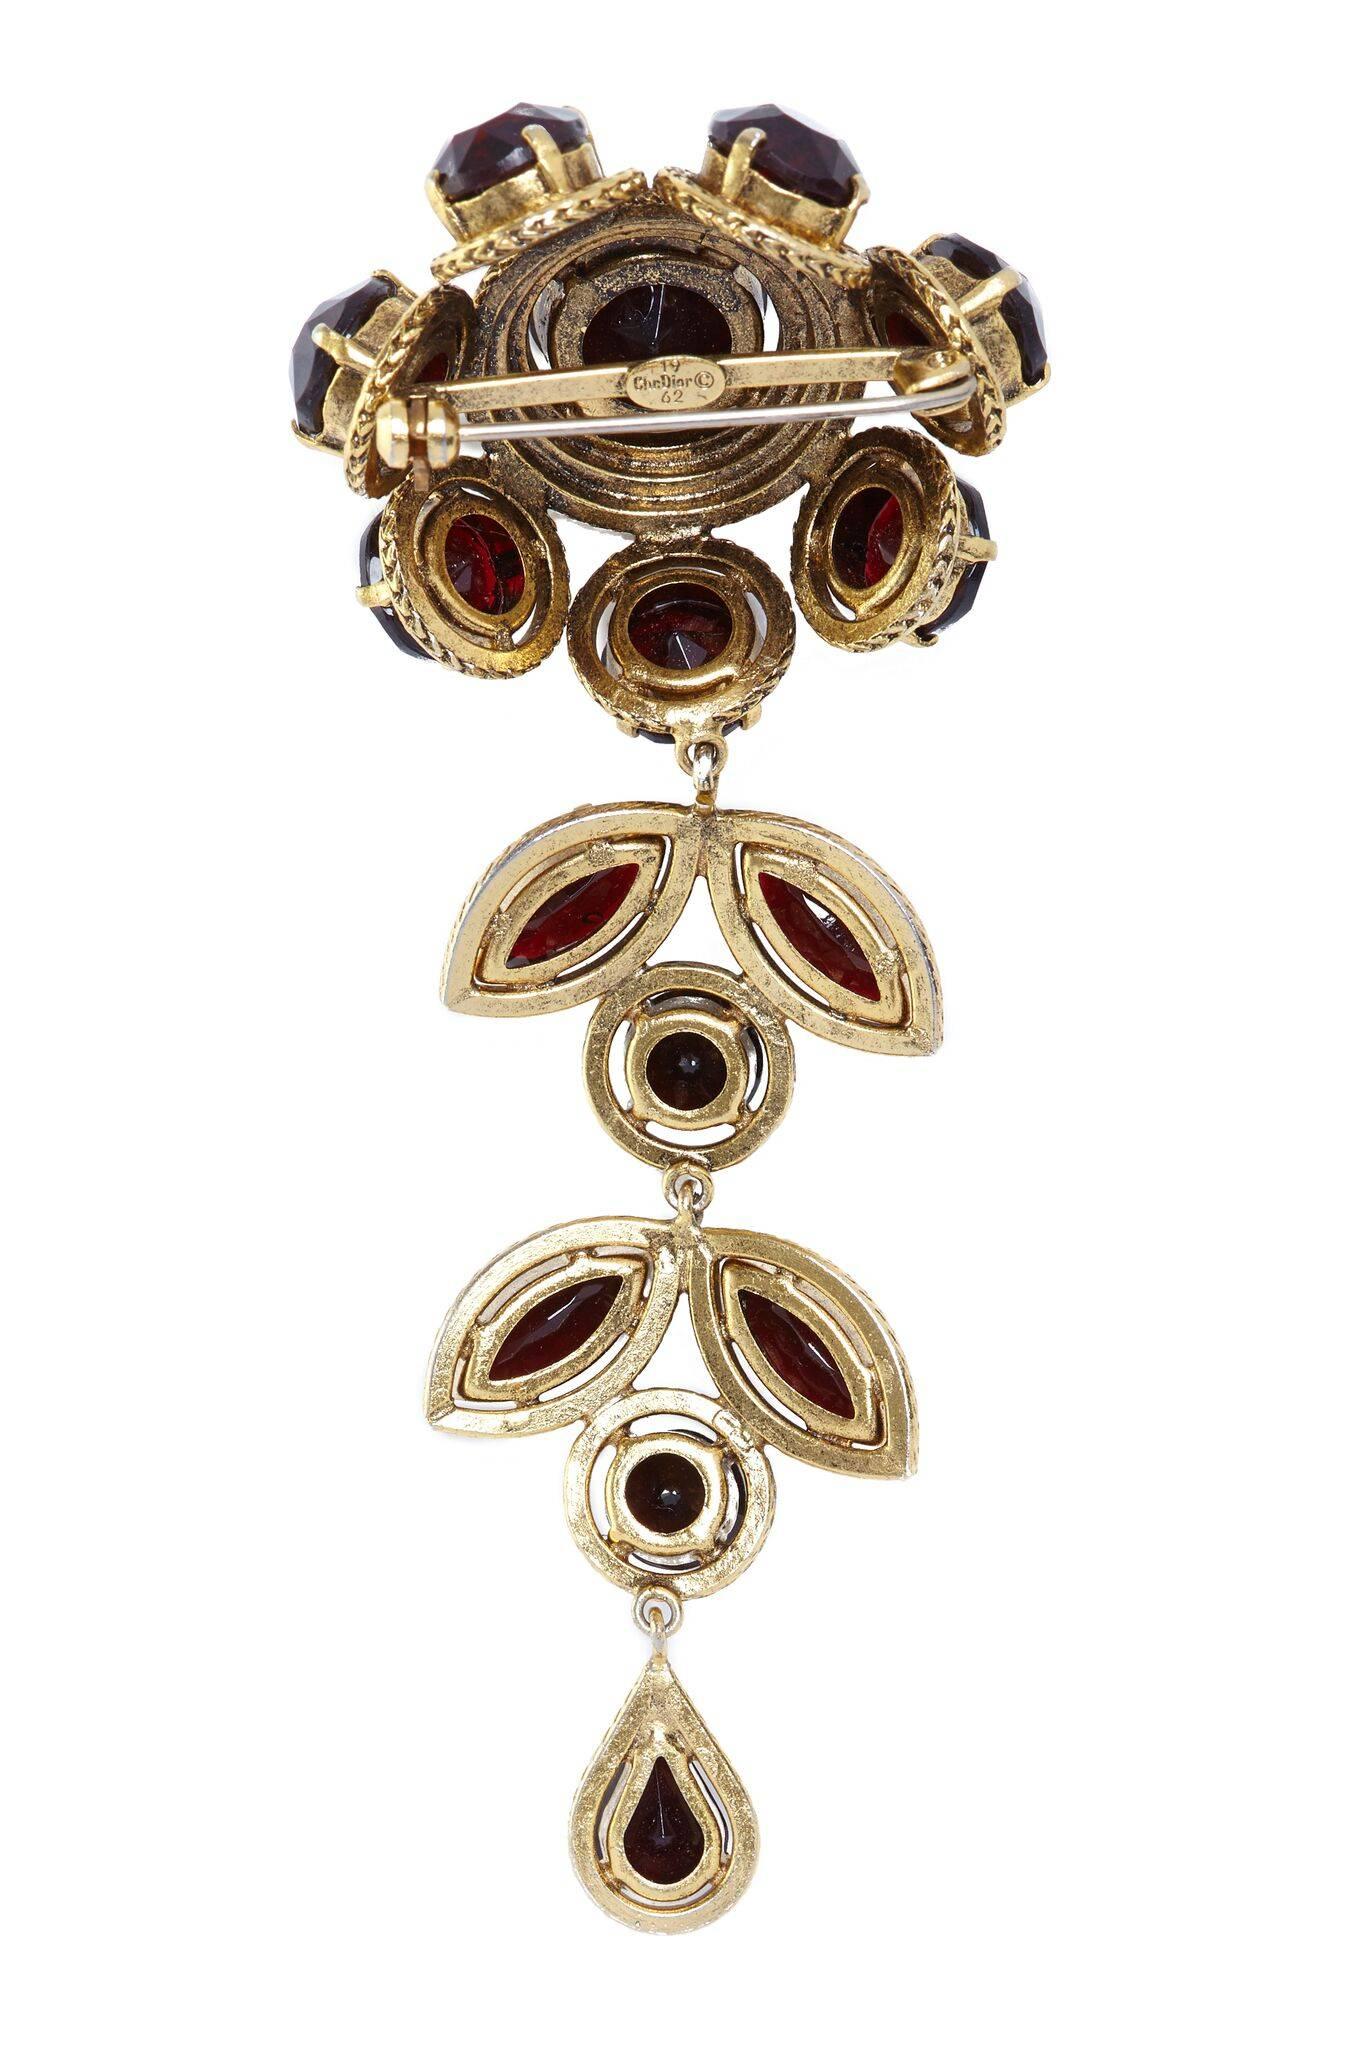 This magnificent 1960s Christian Dior flower drop brooch with prong set rhinestones is in superb vintage condition. Large cut glass rounds in rich garnet red are arranged into a large gold gilt floral design with a lengthly drop detail. The drop is